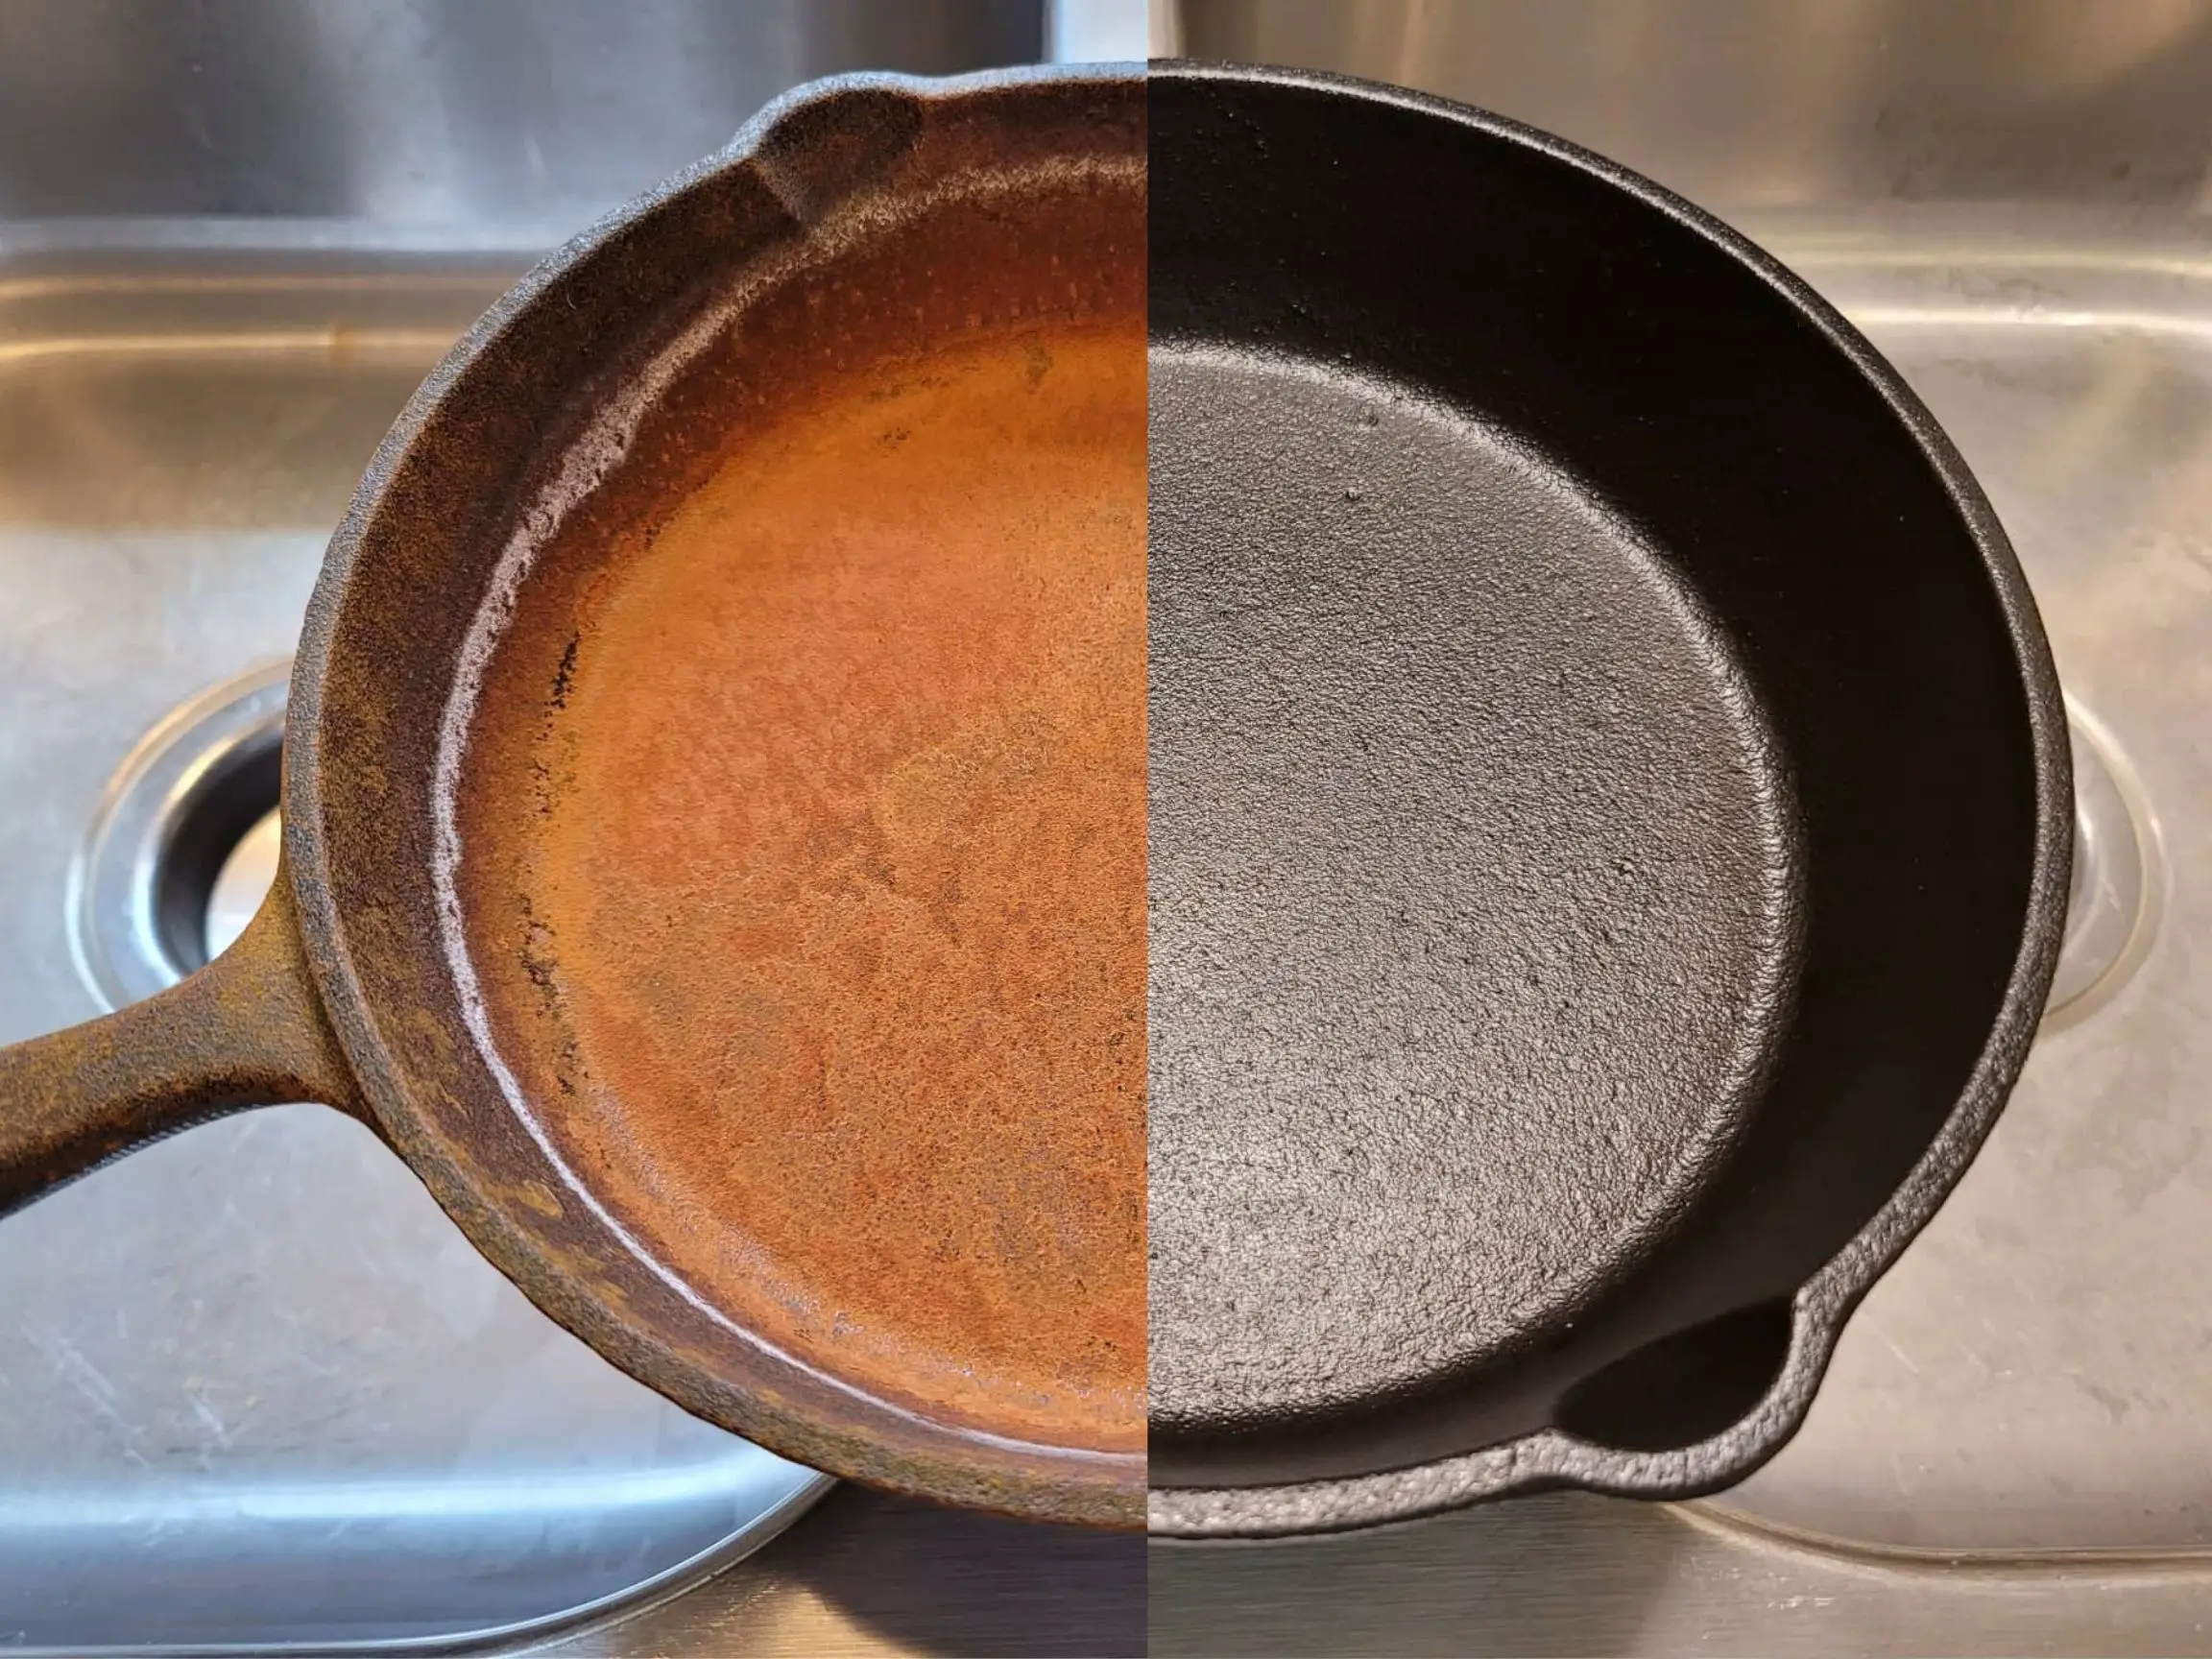 Can You Cook in a Rusted Cast Iron Pan